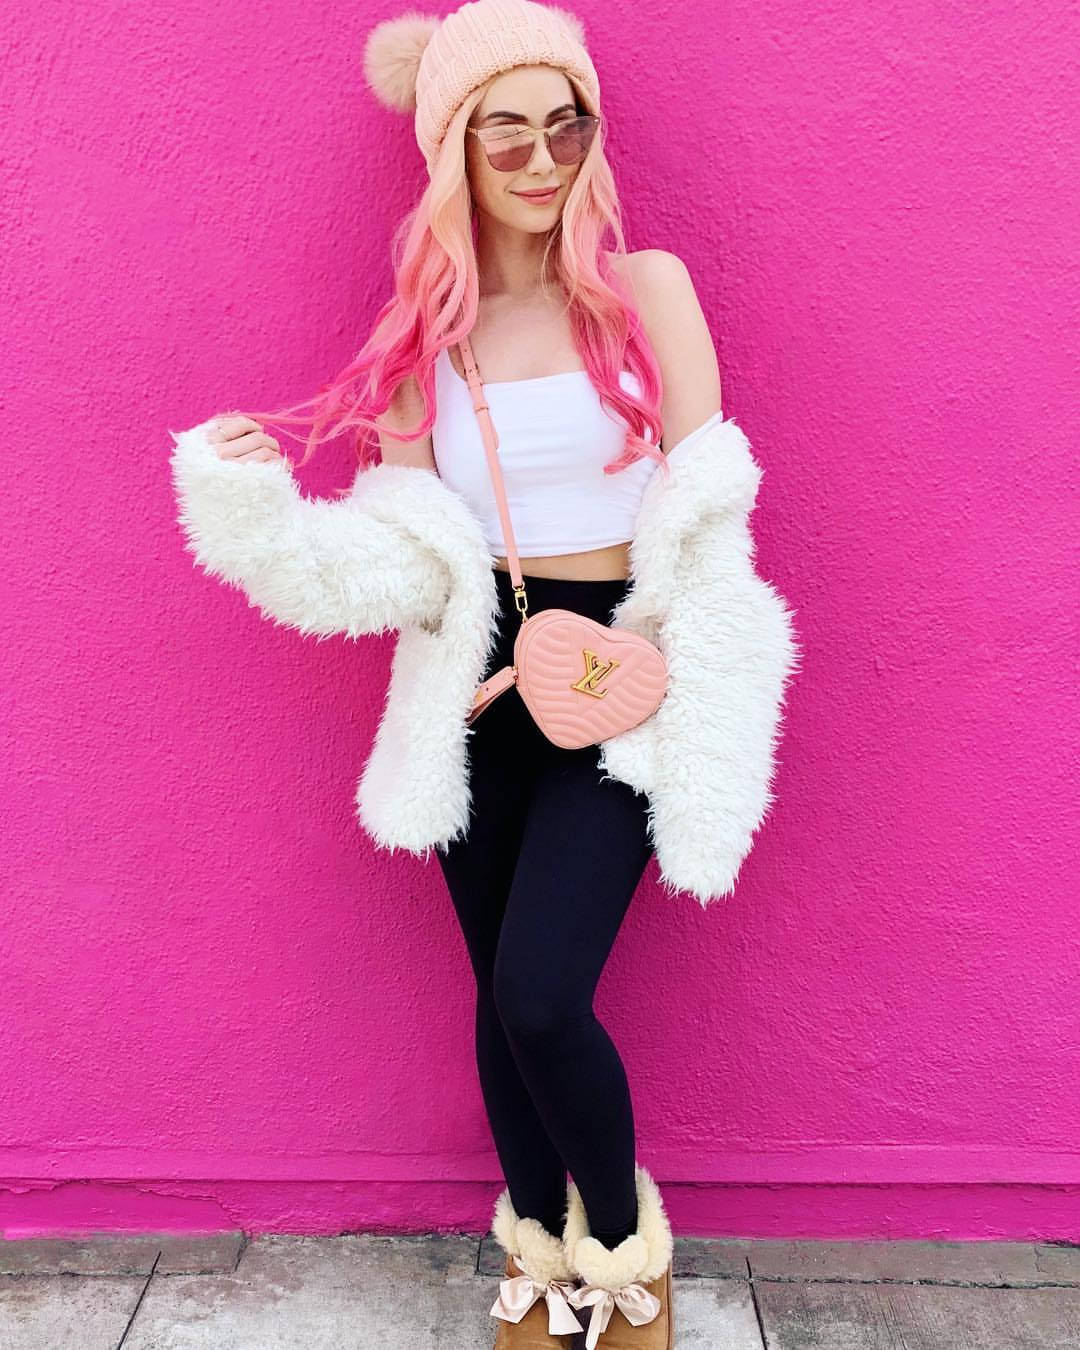 Leah Ashe In The Pink Wall Wallpaper